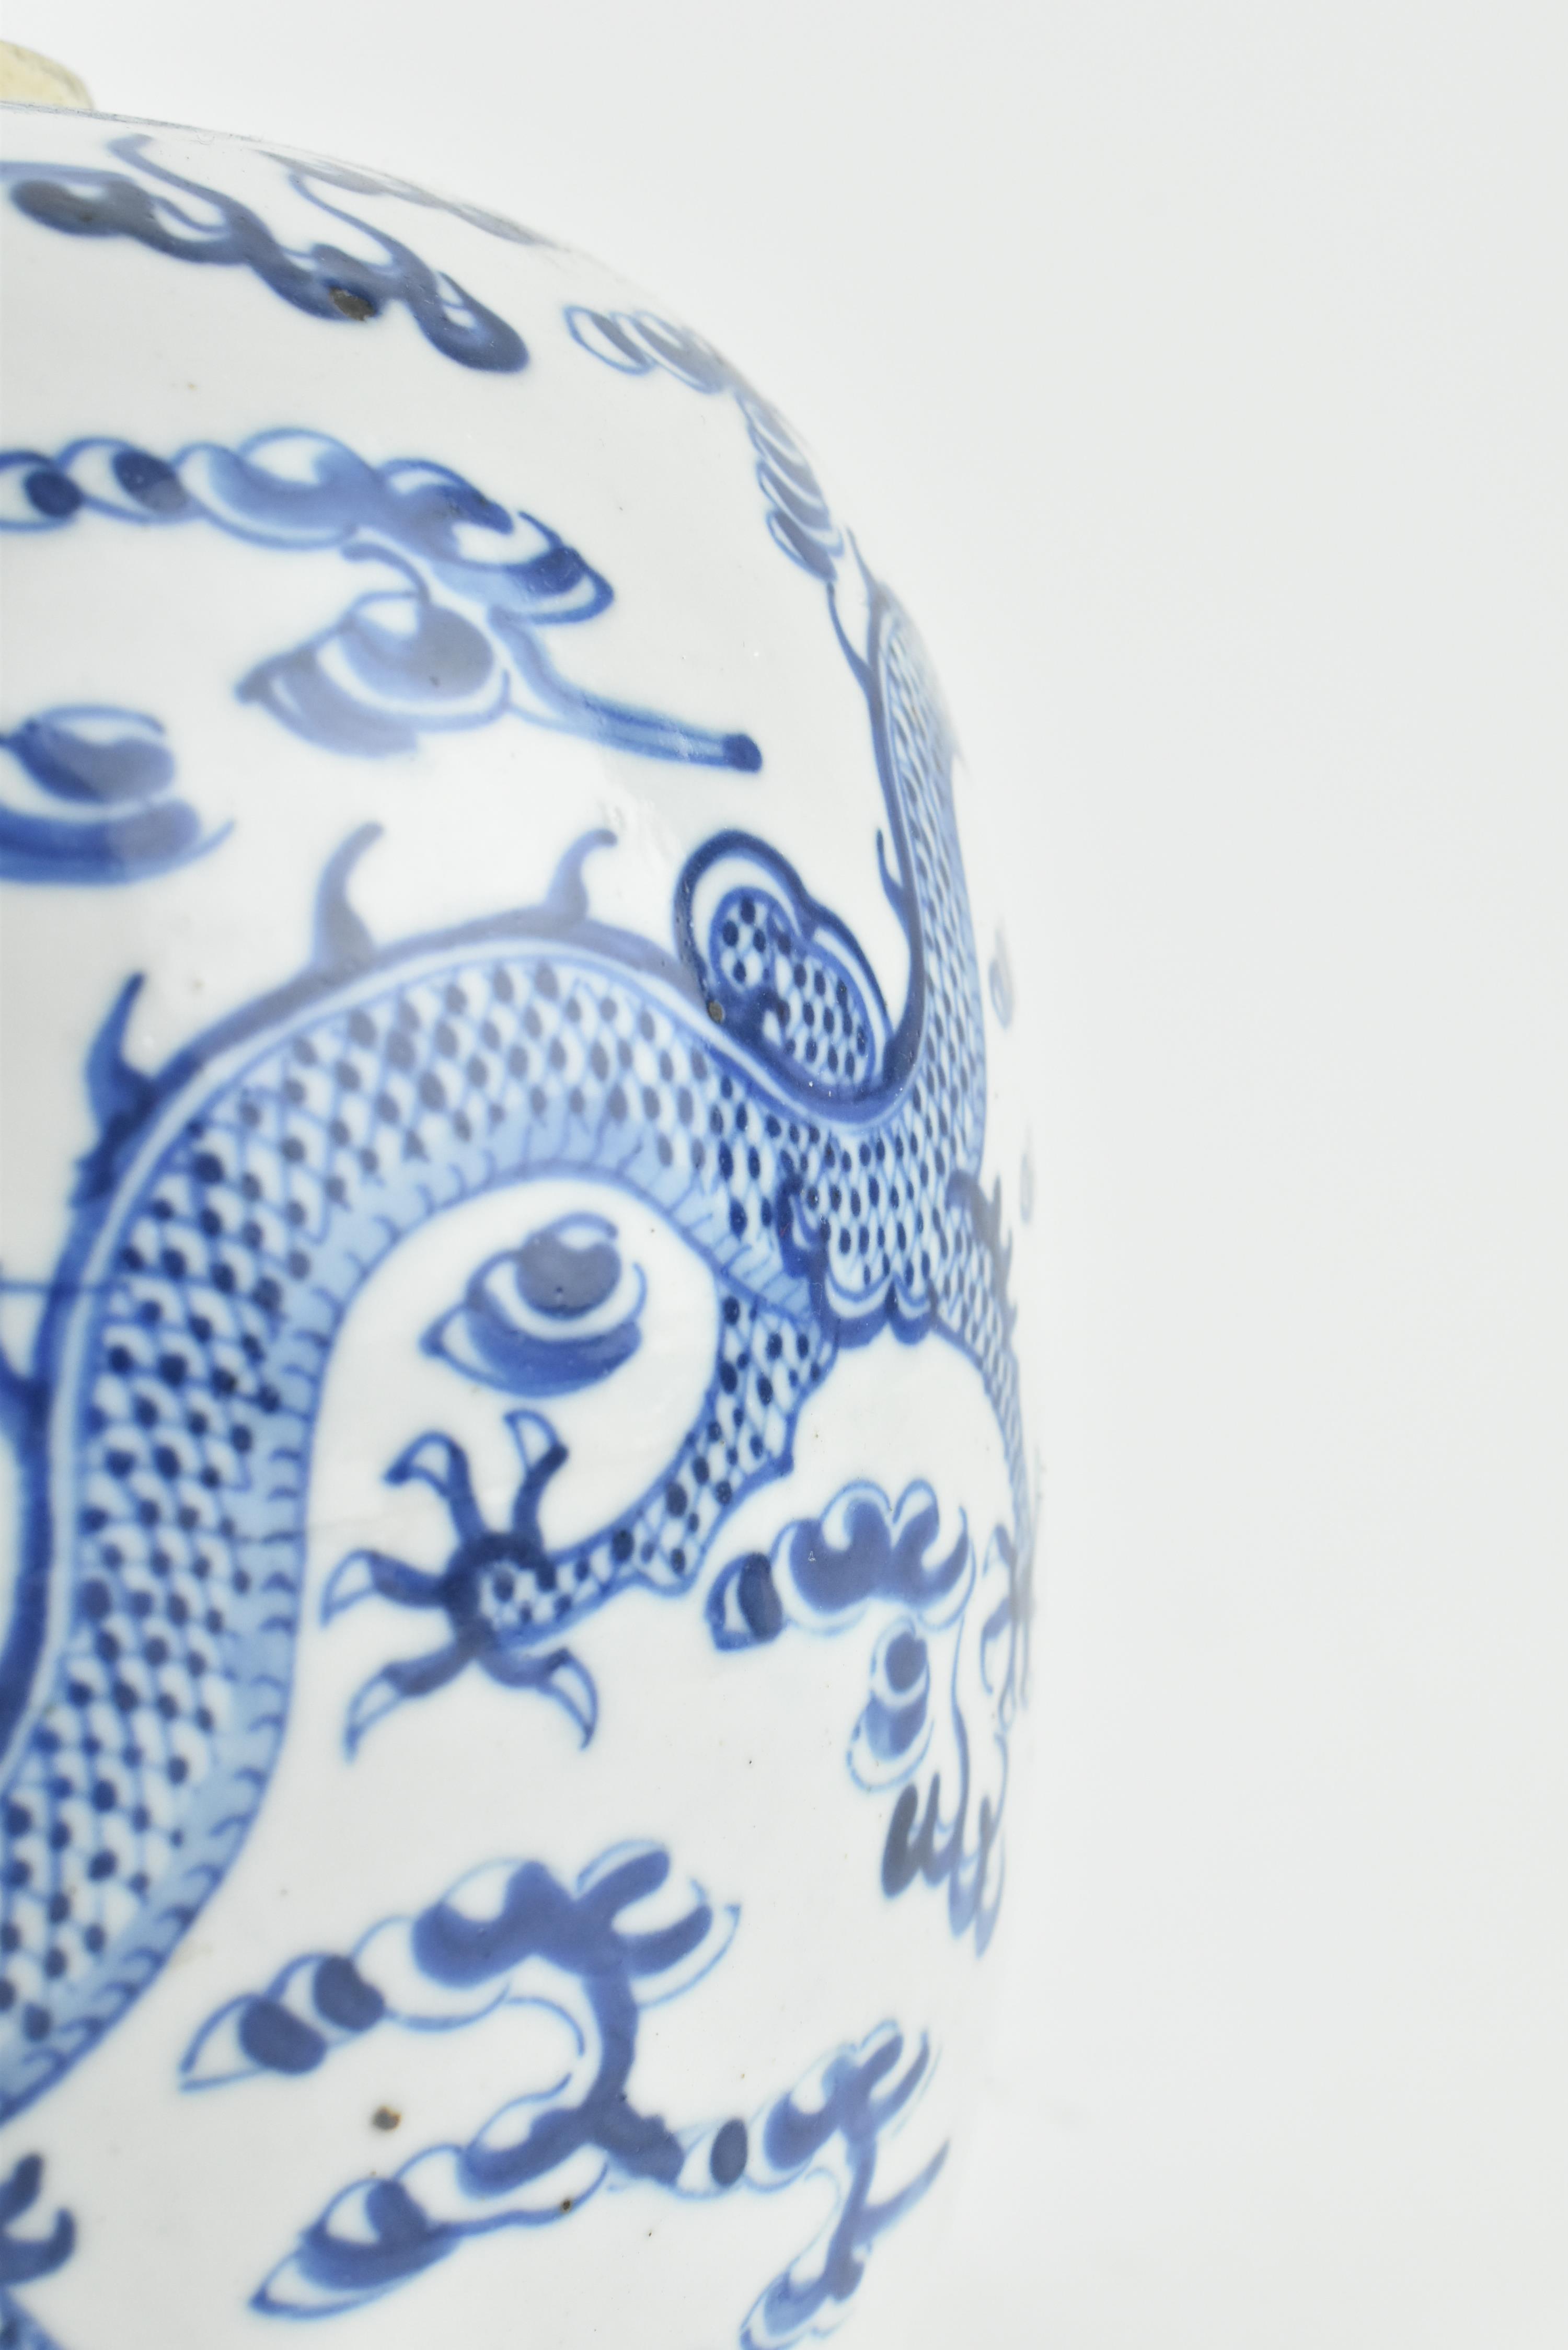 BLUE AND WHITE TWIN DRAGON WITH PEARL JAR 清末 双龙戏珠罐 - Image 5 of 6